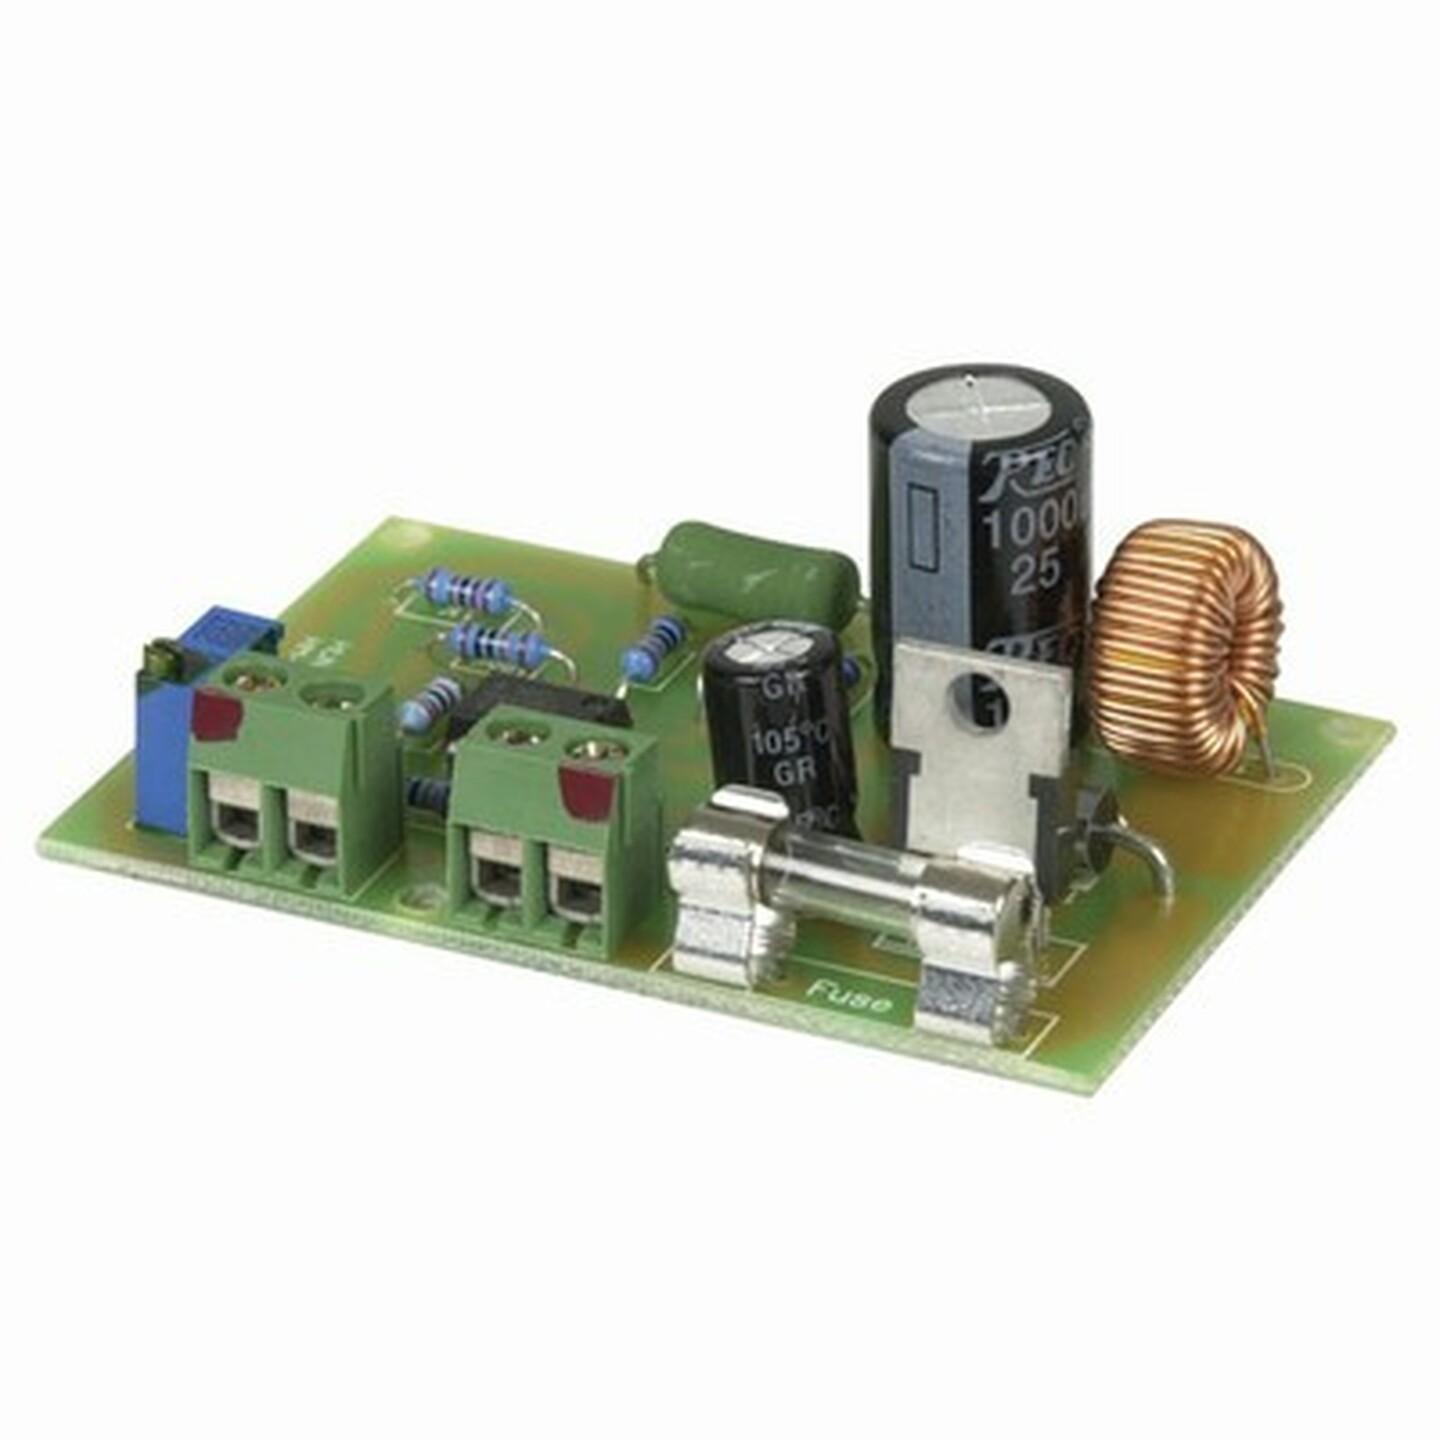 Power Supply Module for 1W Luxeon LED Star Modules